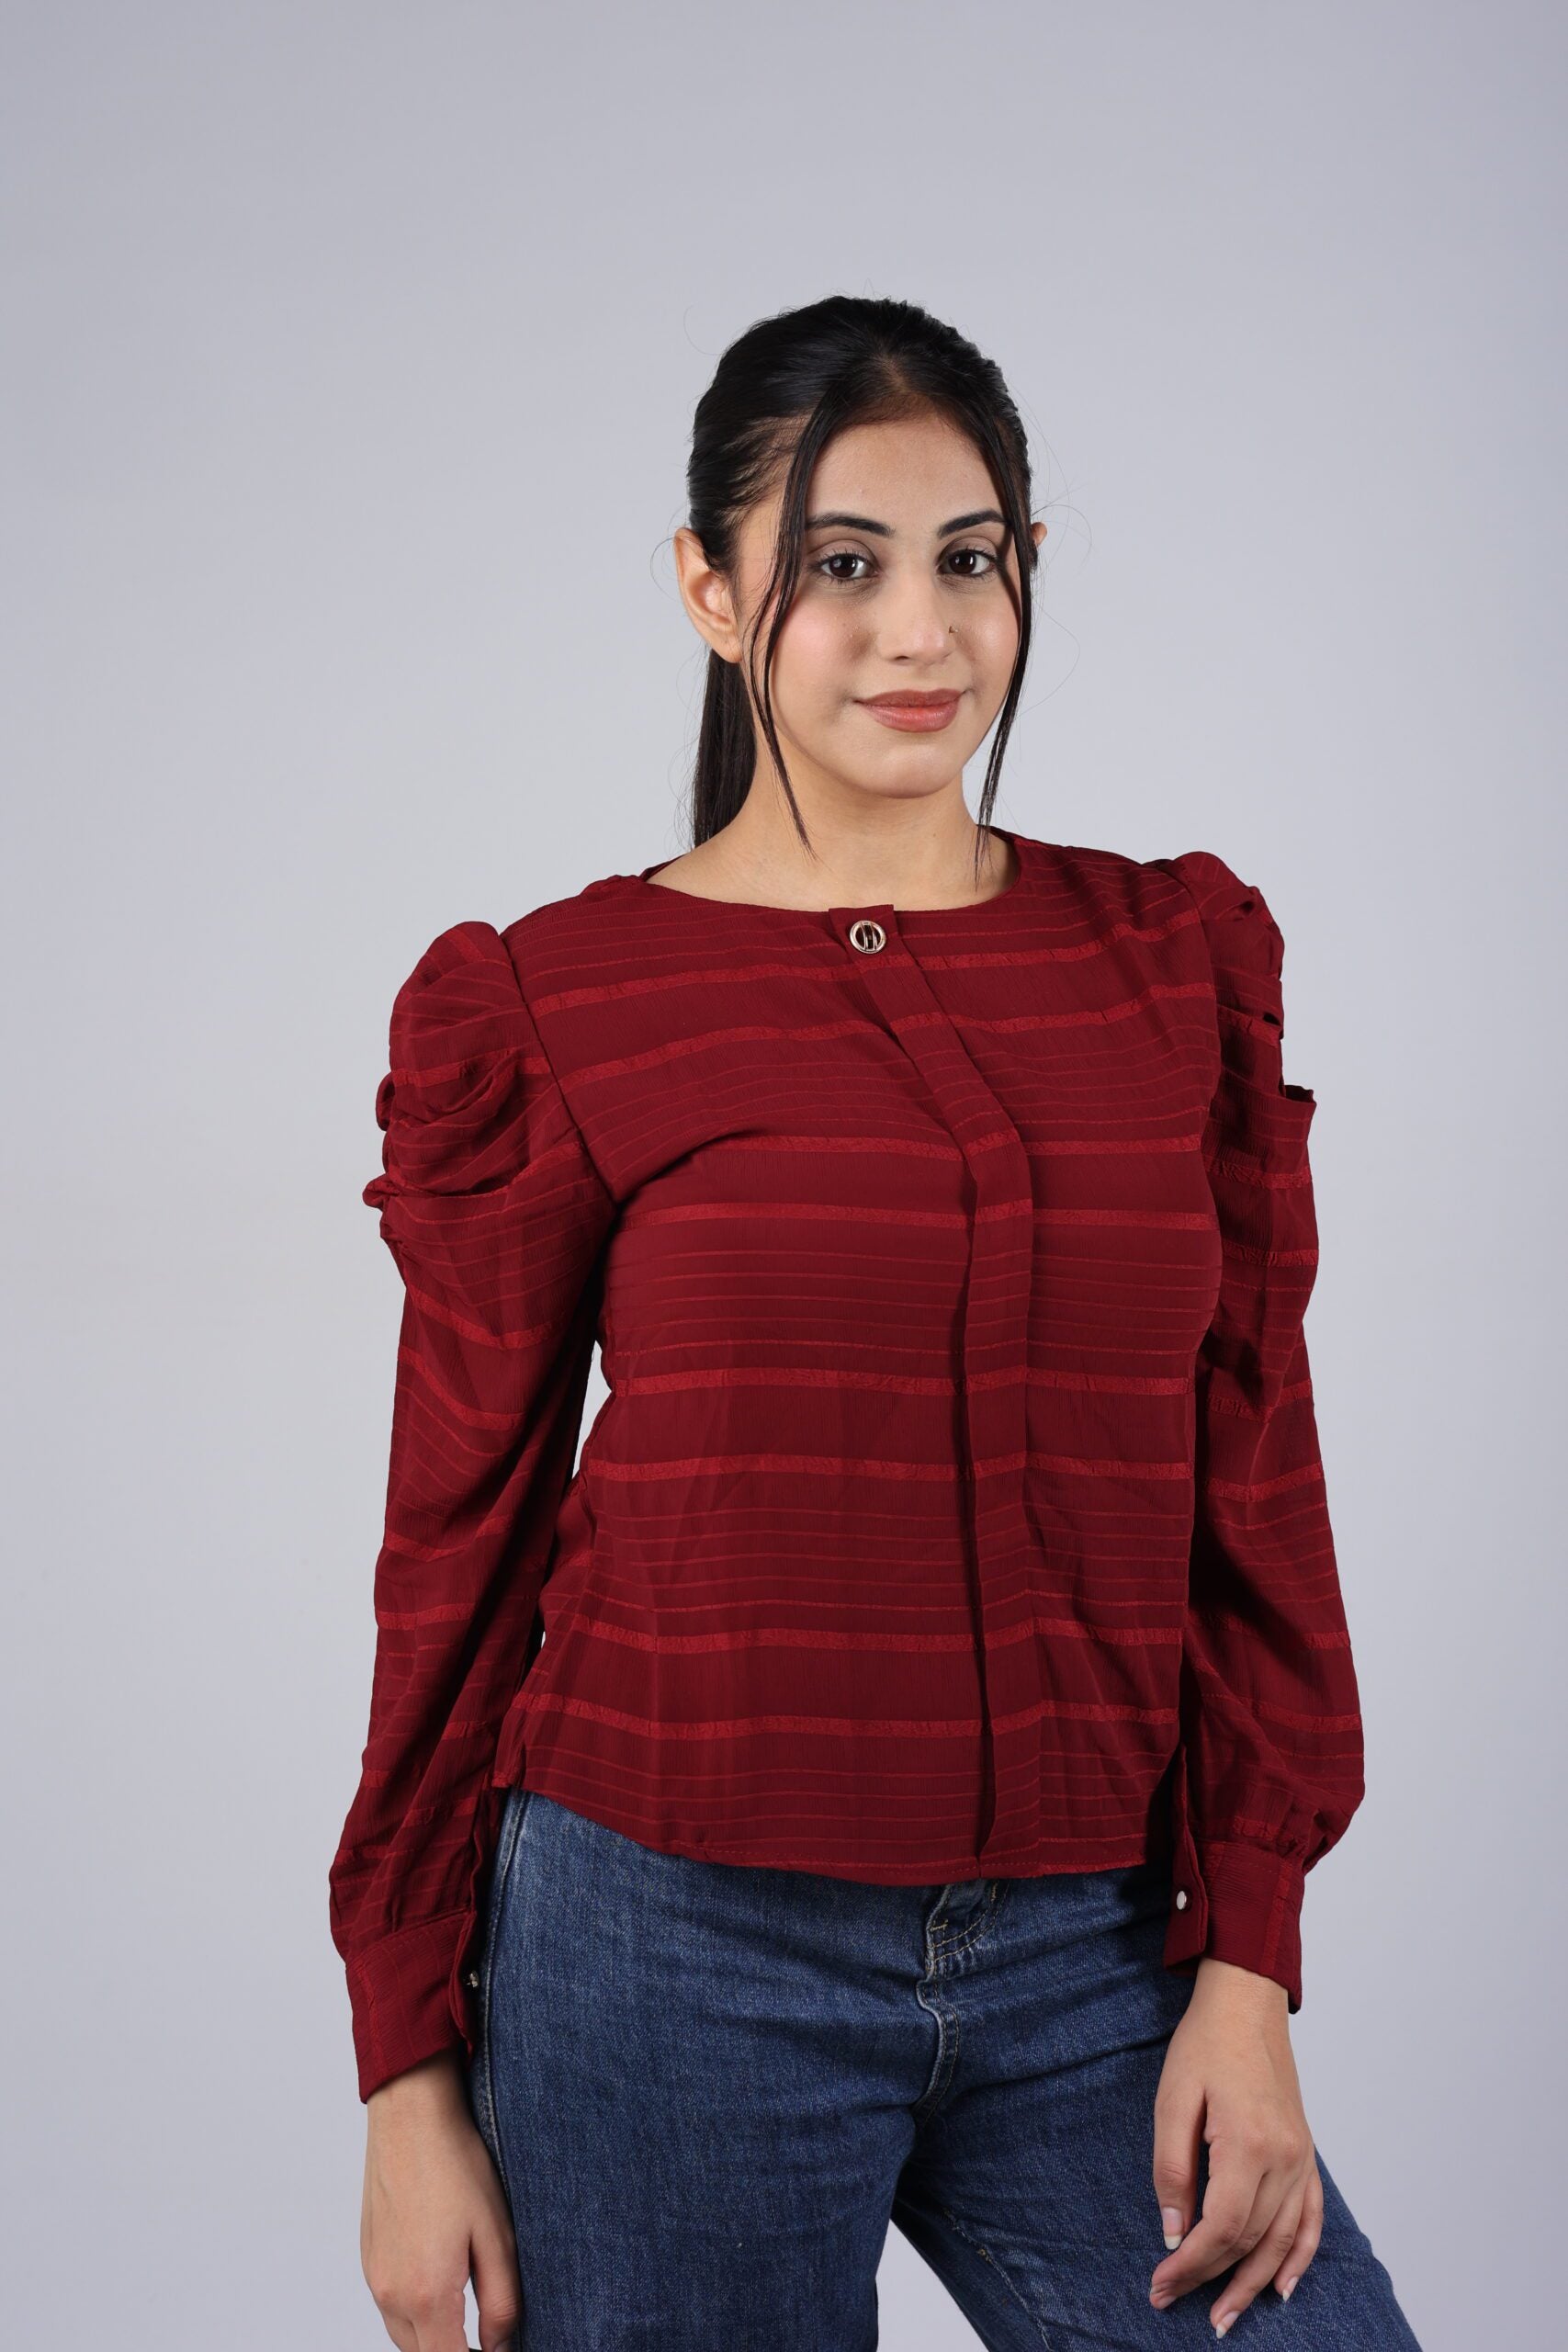 Puff Sleeve Chiffon Top (Red) A Stunning and Elegant Addition to Your Wardrobe!